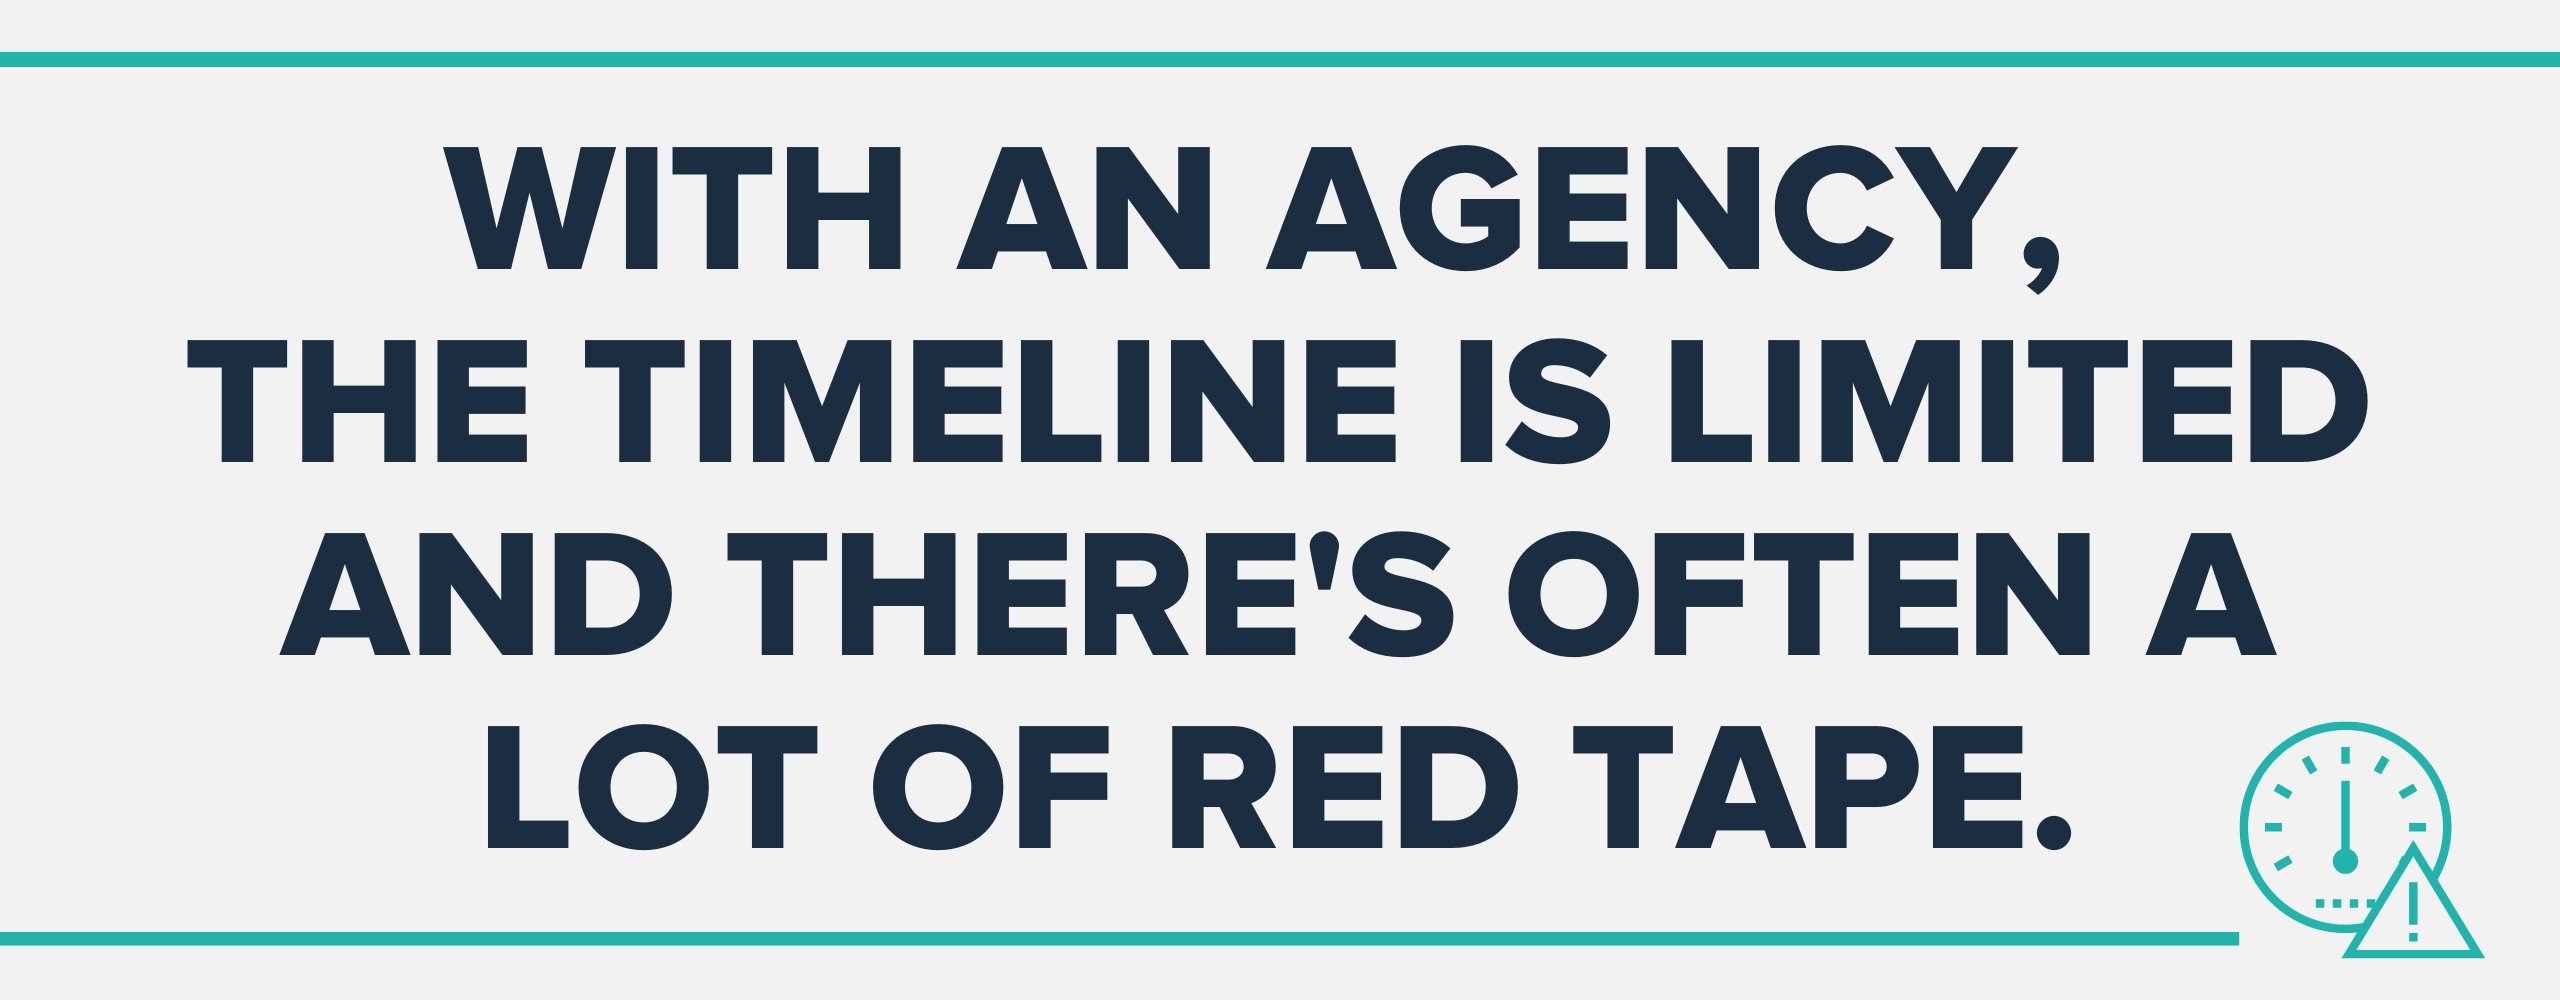 agency-red-tape